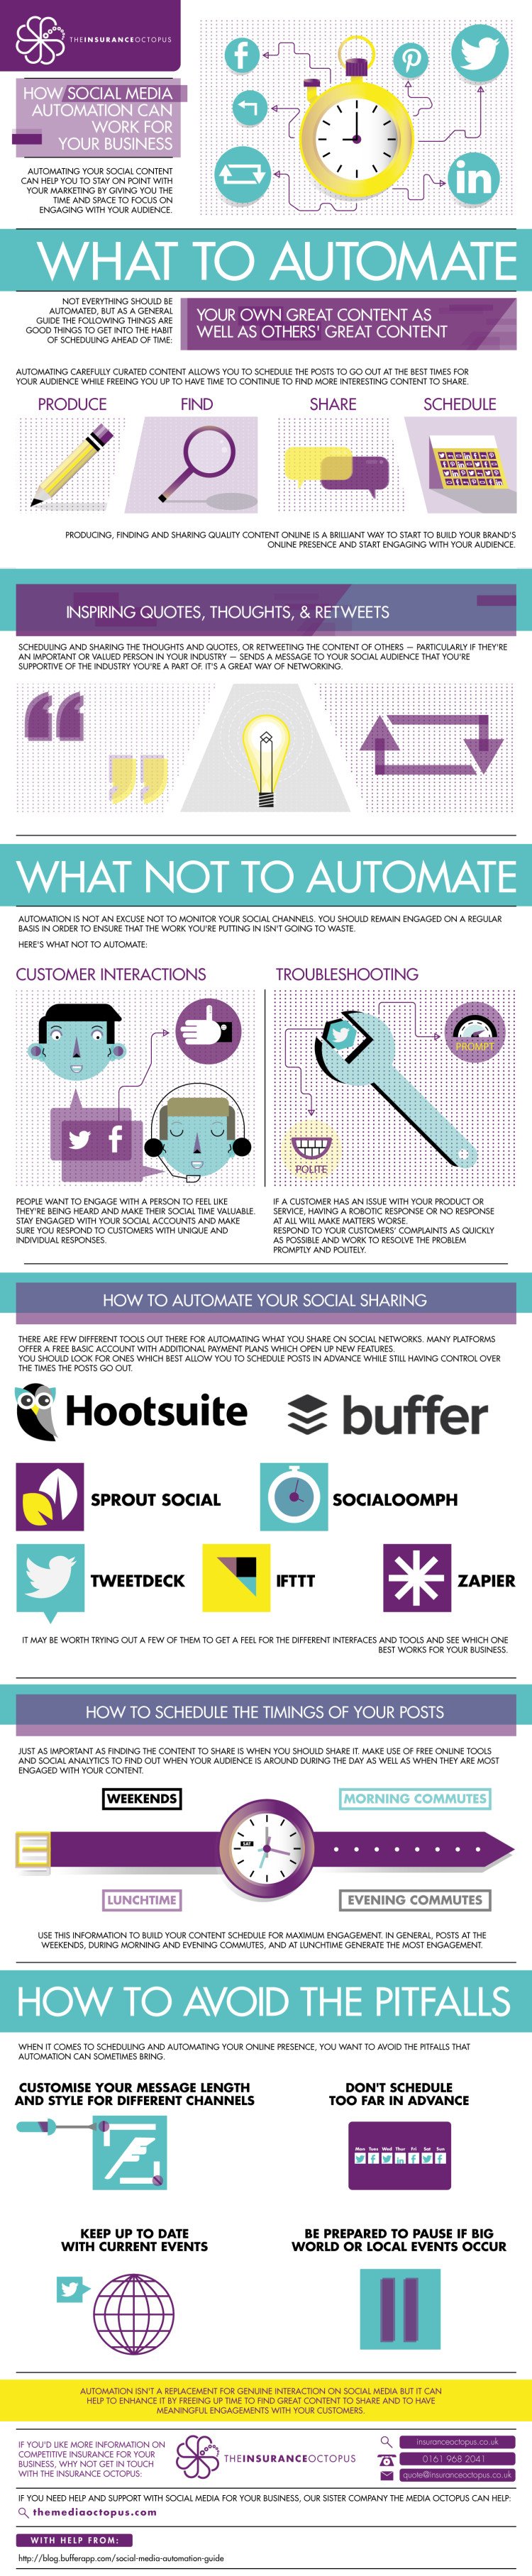 How Social Media Automation Can Work For Your Business [Infographic]